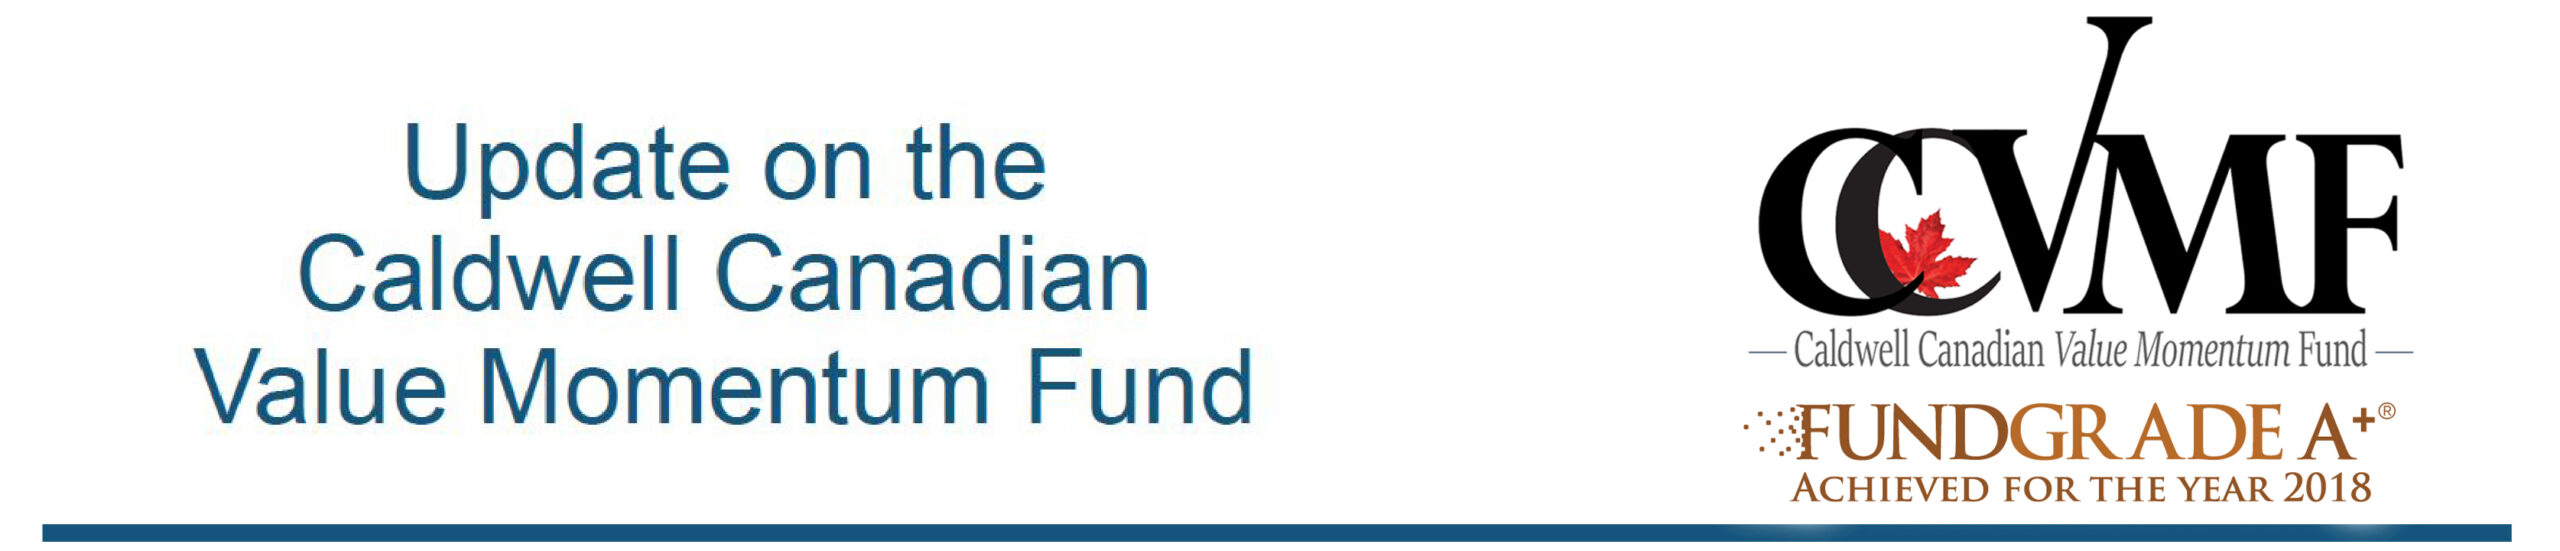 Update on the Caldwell Canadian Value Momentum Fund